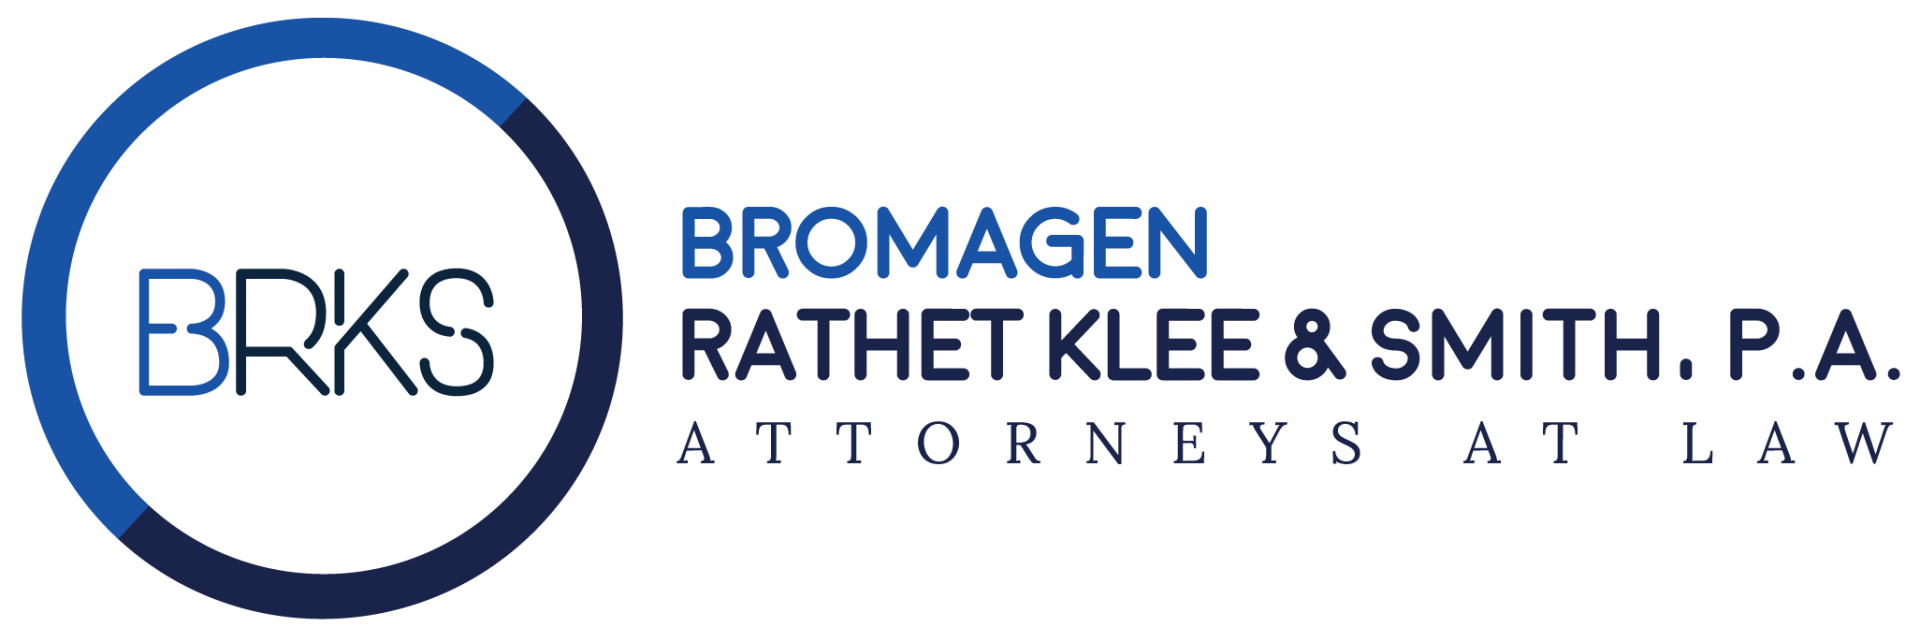 The logo for brks ratchet klee & smith p.a. attorneys at law